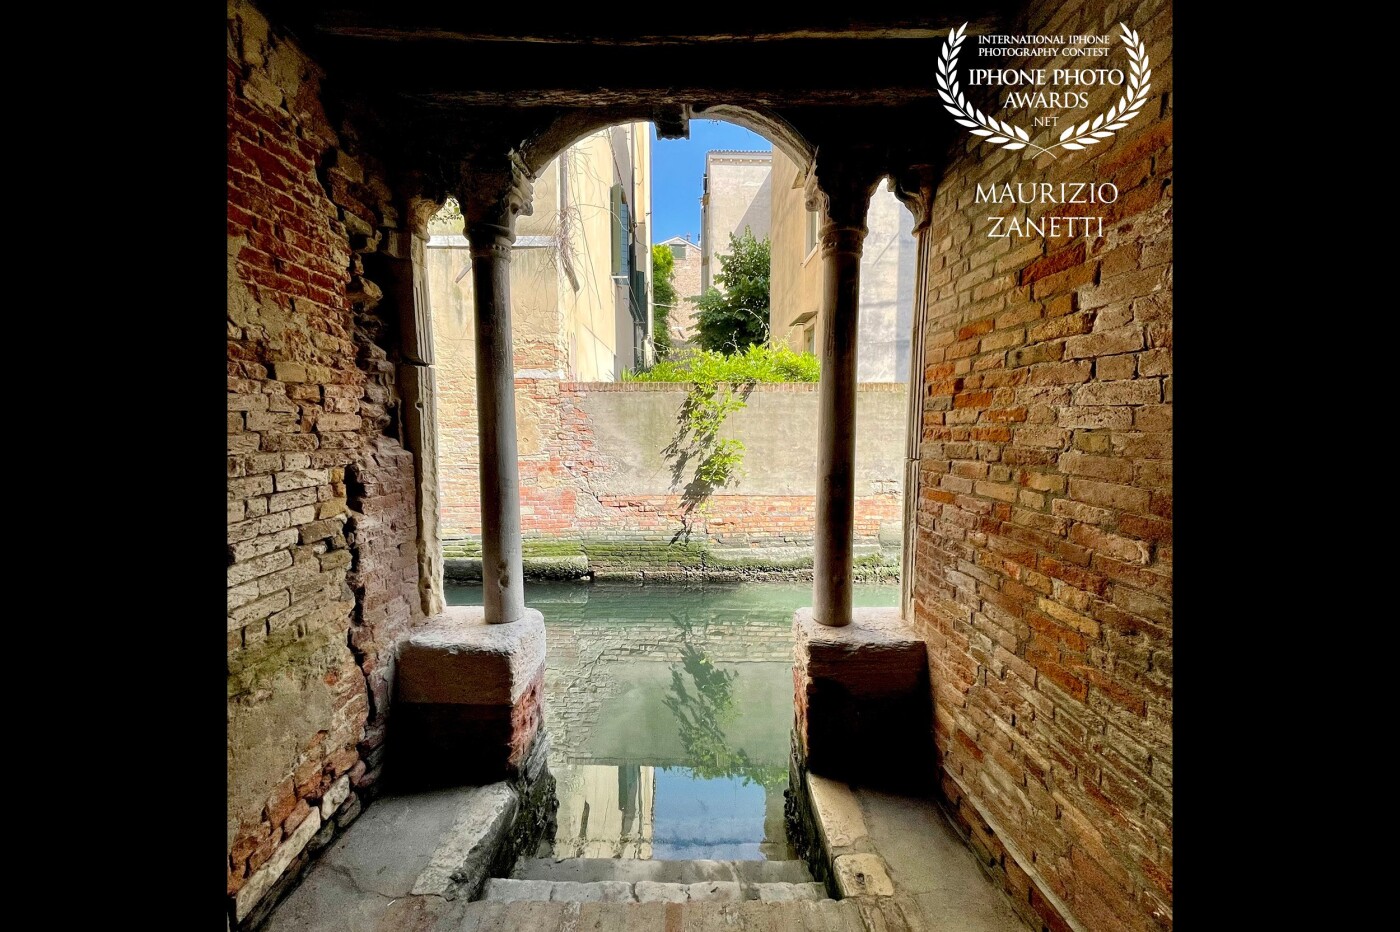 With a lot of curiosity and patience and a little luck, the splendid and well-known Venice can still surprise you with small priceless glimpses. Like the "Fondamenta de le Grue".